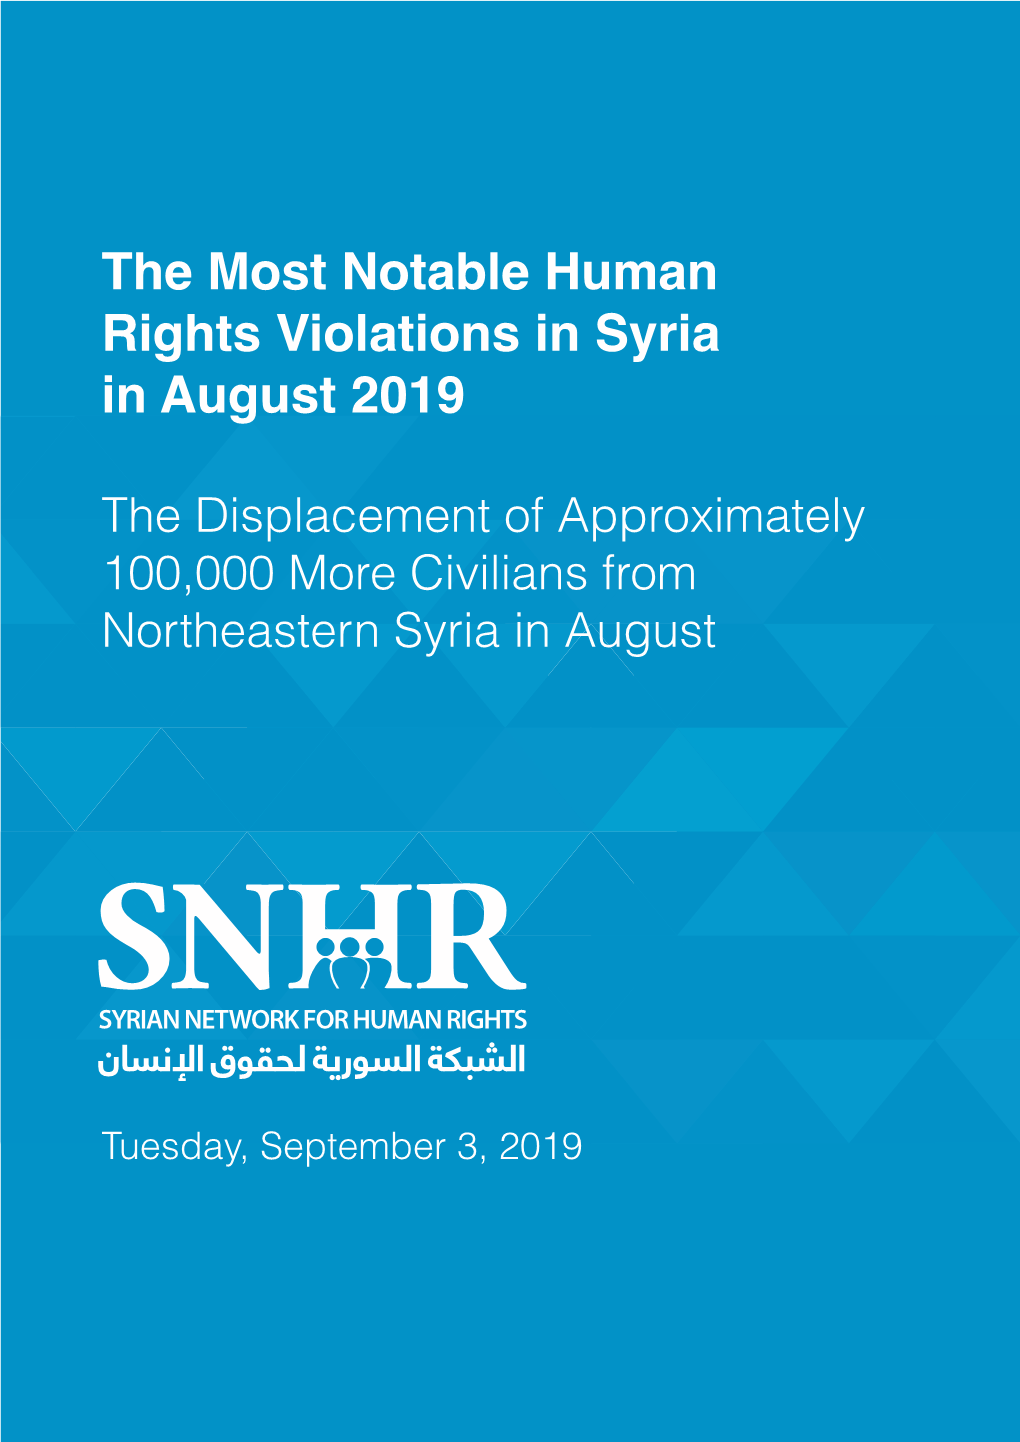 The Most Notable Human Rights Violations in Syria in August 2019